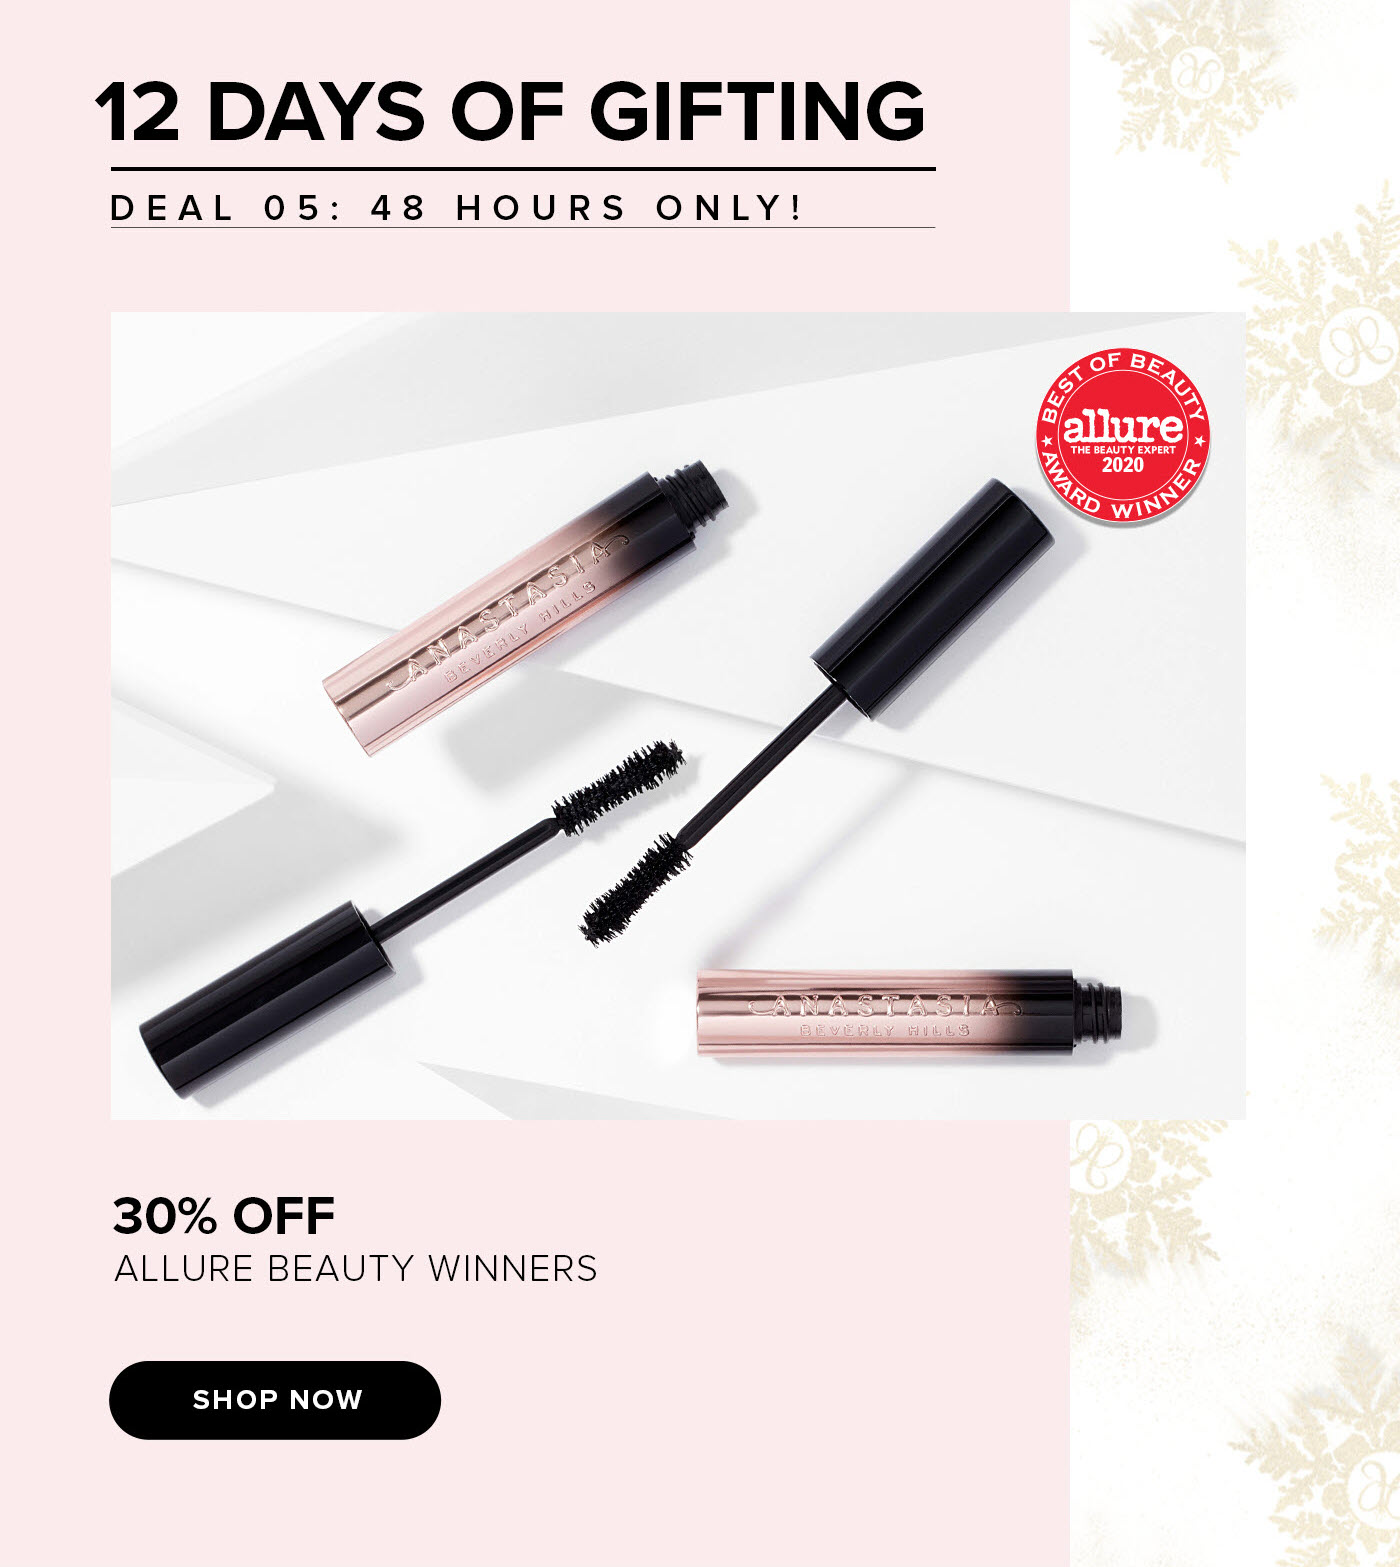 12 Days of Gifting - Deal 5: 30% Off Allure Beauty Winners